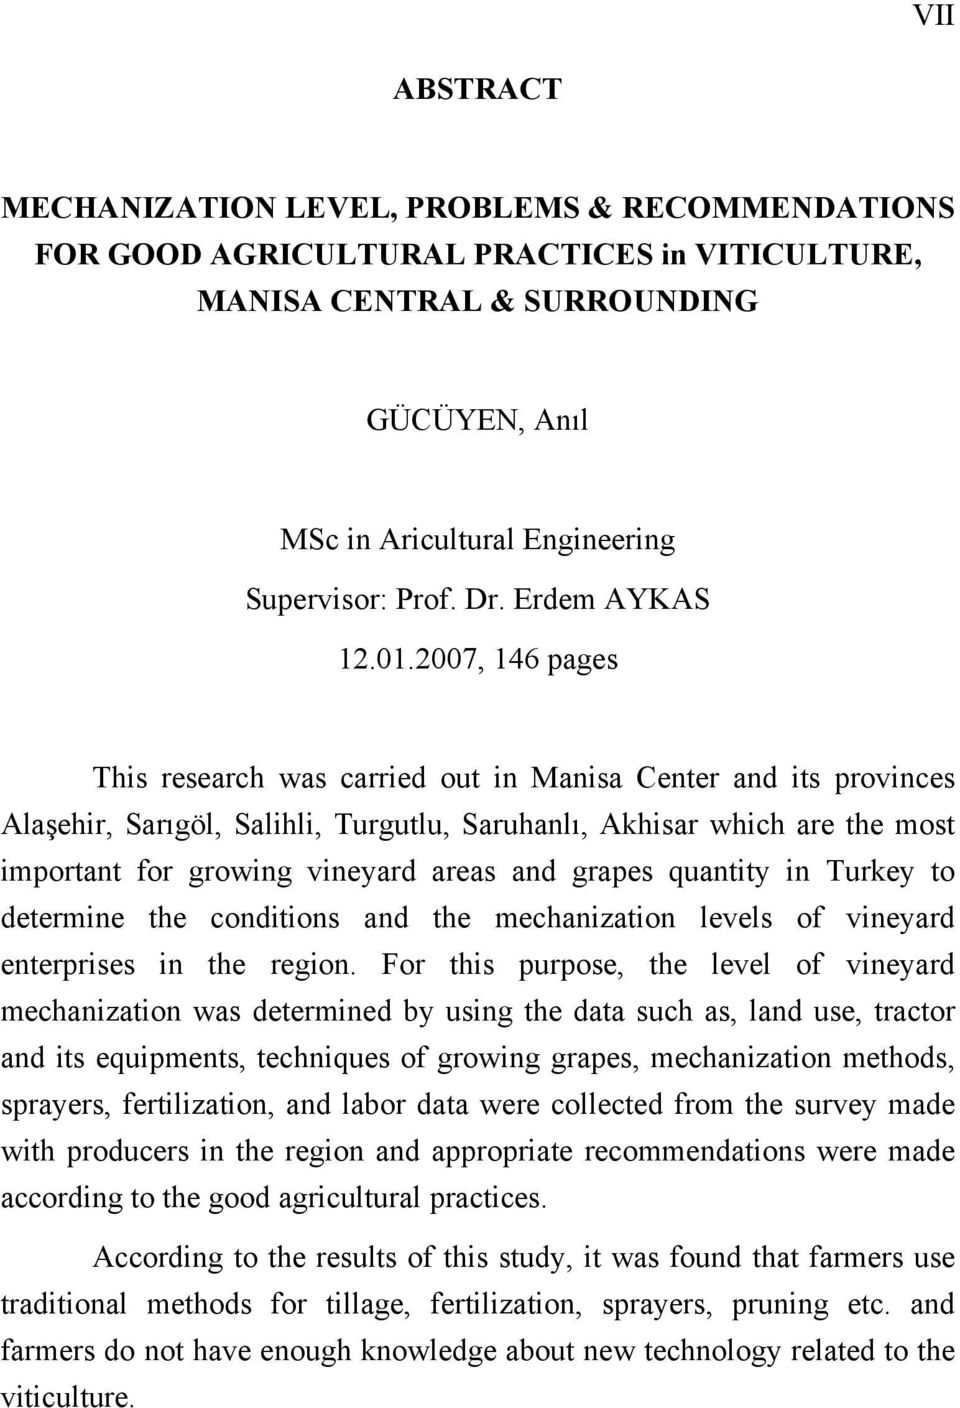 2007, 146 pages This research was carried out in Manisa Center and its provinces Alaşehir, Sarıgöl, Salihli, Turgutlu, Saruhanlı, Akhisar which are the most important for growing vineyard areas and